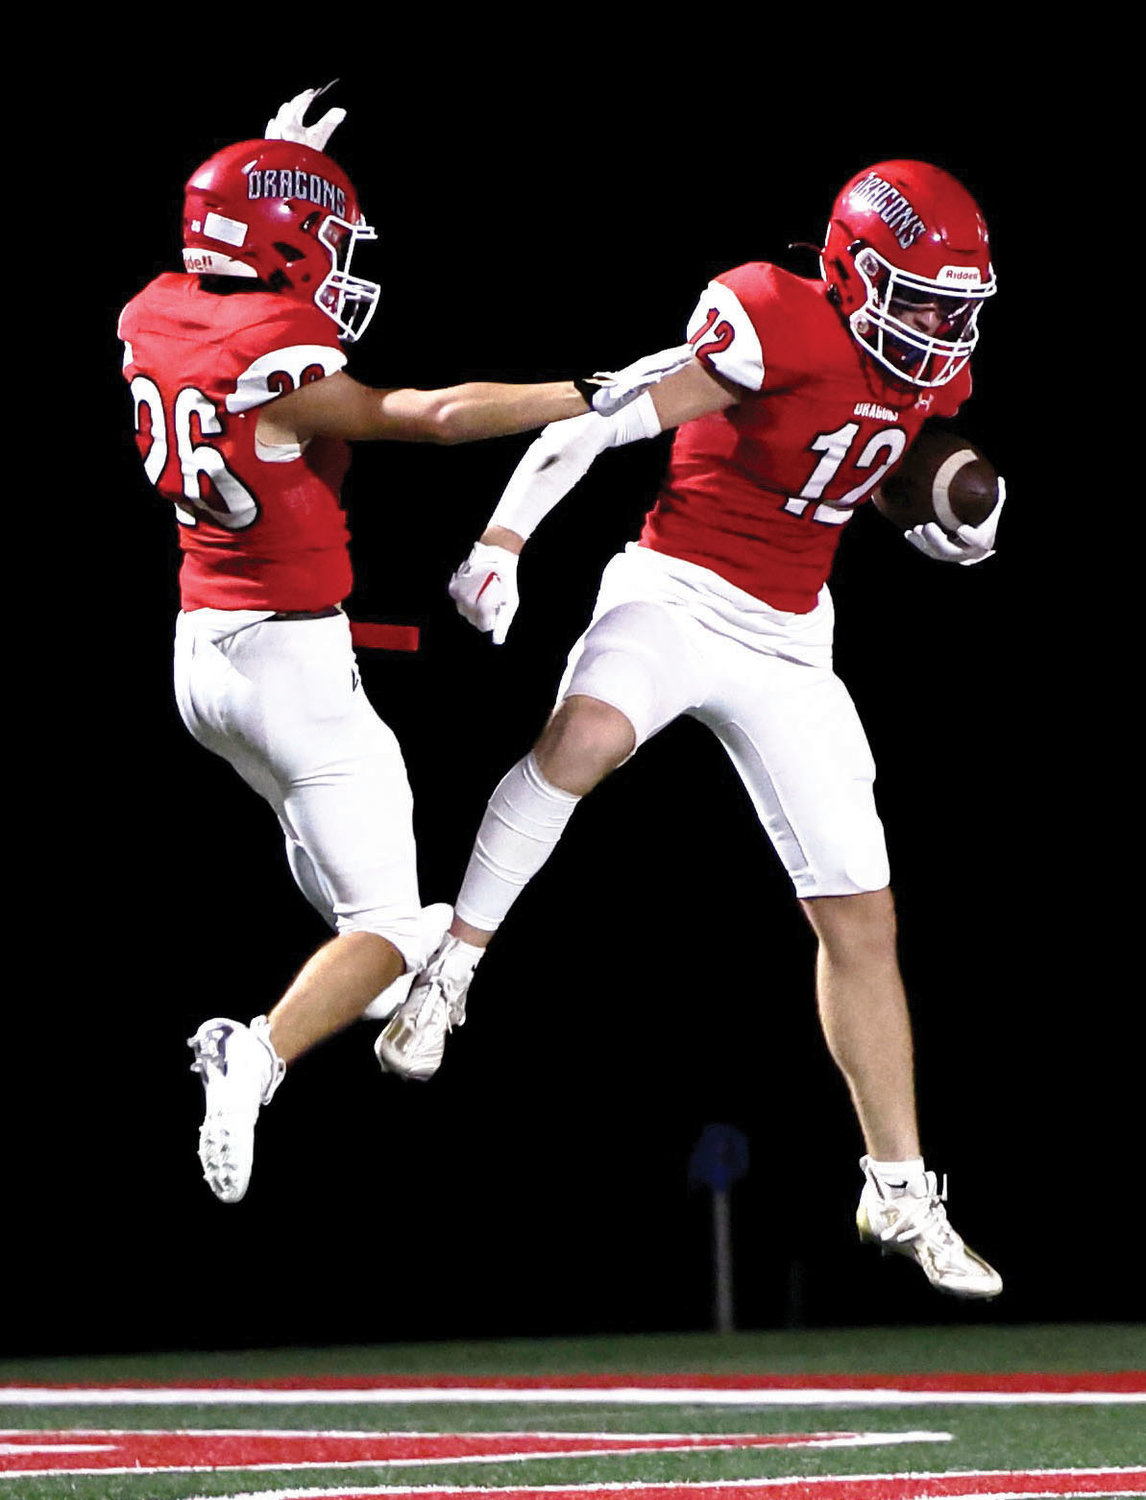 Purcell senior Lincoln Eubank (12) celebrates a touchdown with teammate Jett Tyler (26) during the Dragons’ 58-7 win over Crooked Oak. Eubank had two touchdown receptions for a total of 87 yards receiving.